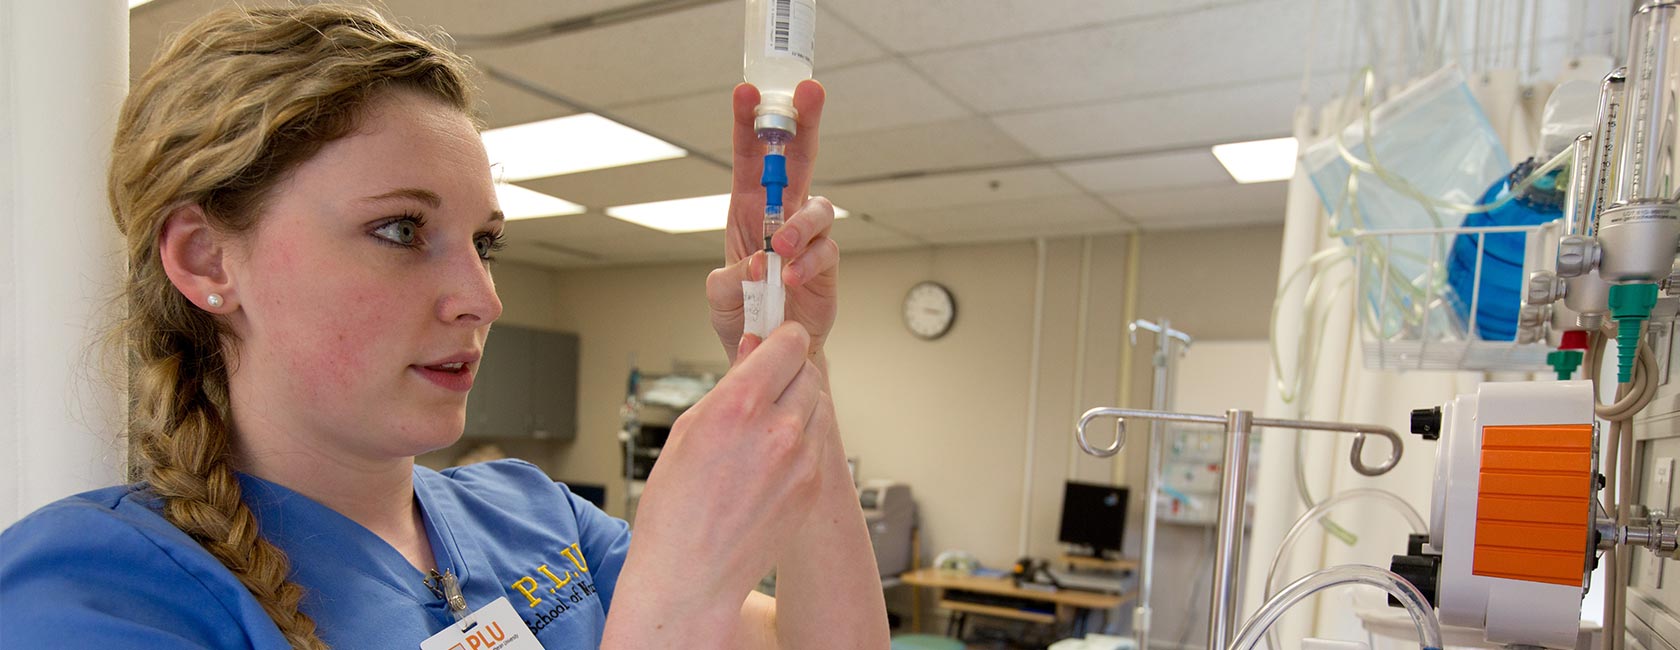 Nursing student working with an IV